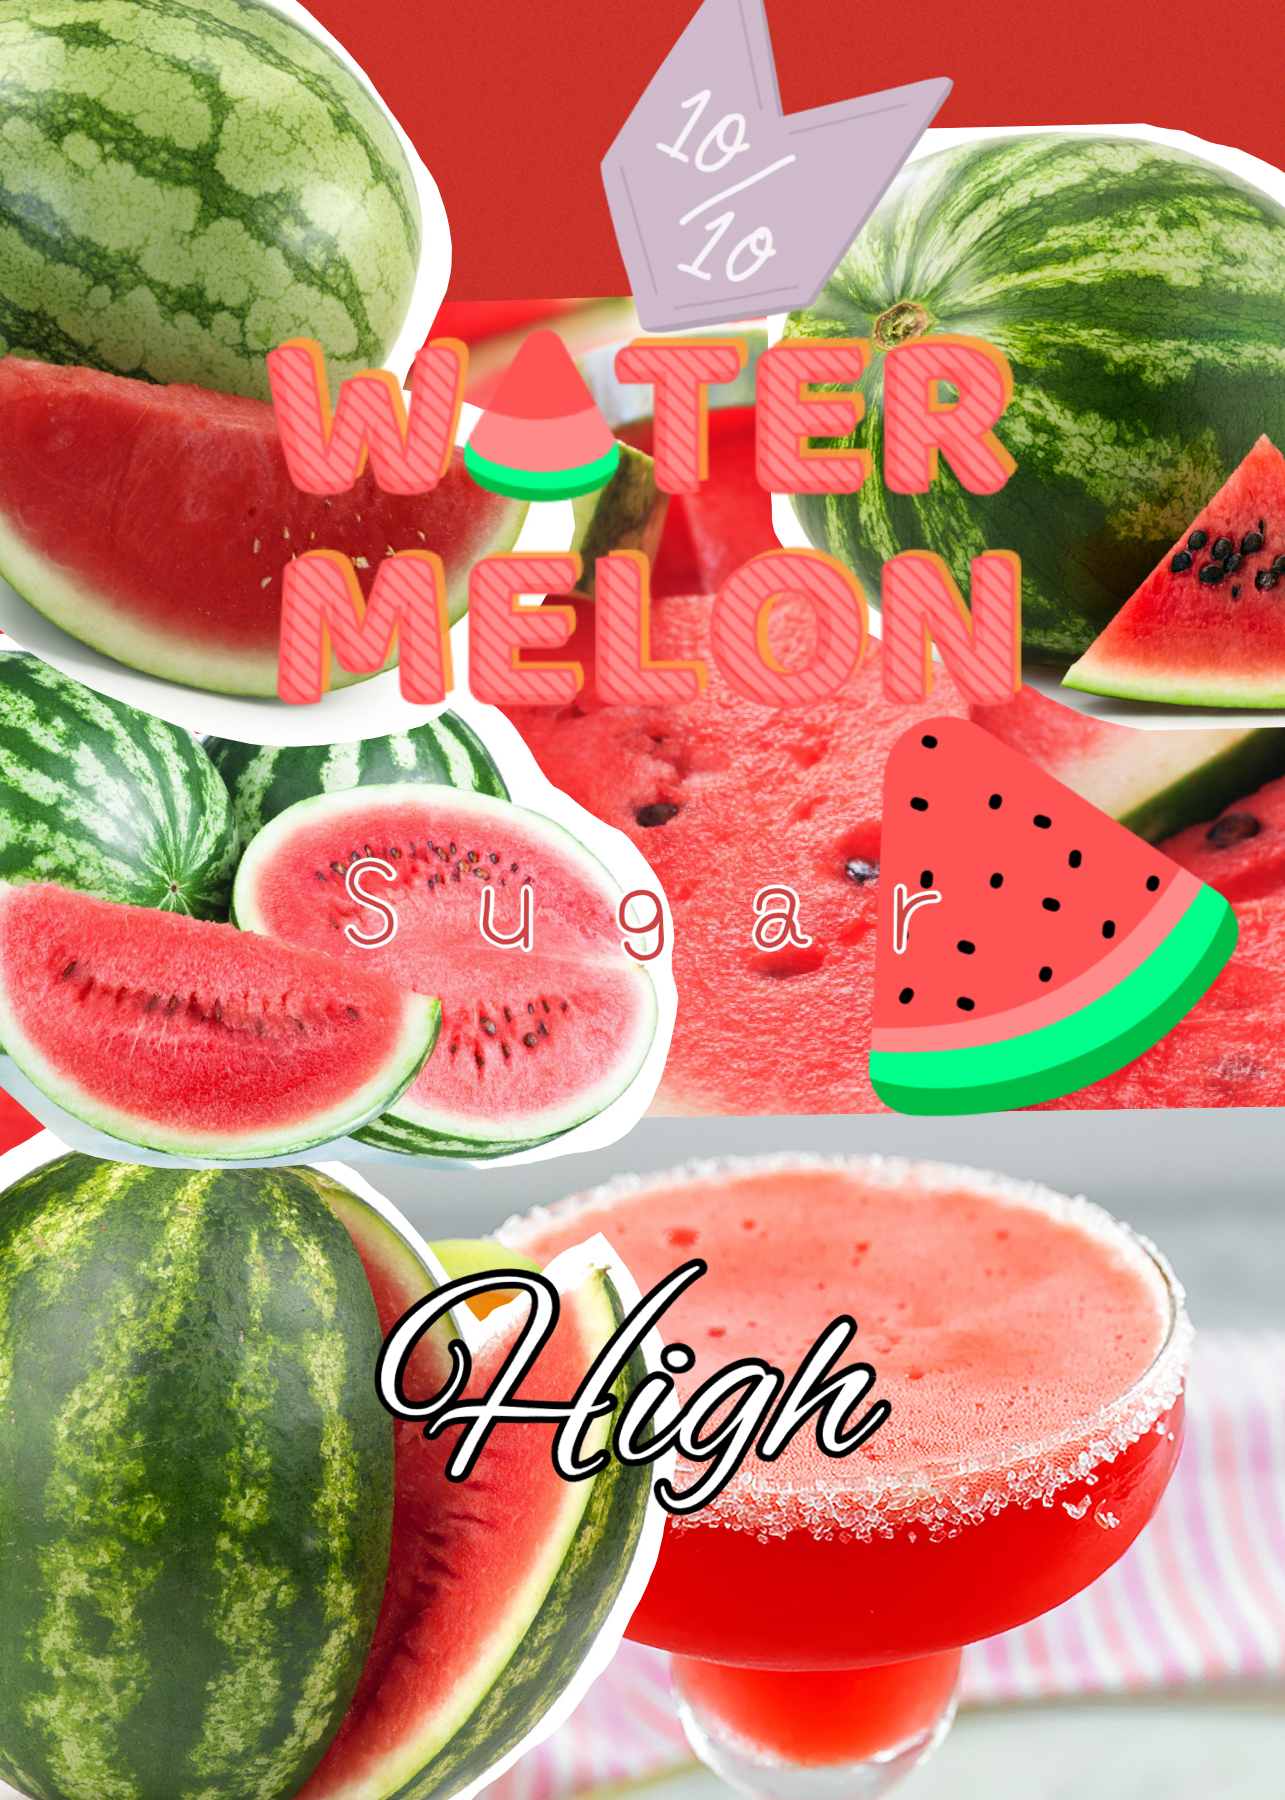 #watermelonSupermacy🙏
#HarryStyles#
#WatermelonSugarHigh
Me and friend had a battle
Over making the best 
Collage..if you wanna see 
Hers, her user is ‘kaylese’
Who do you think won???
